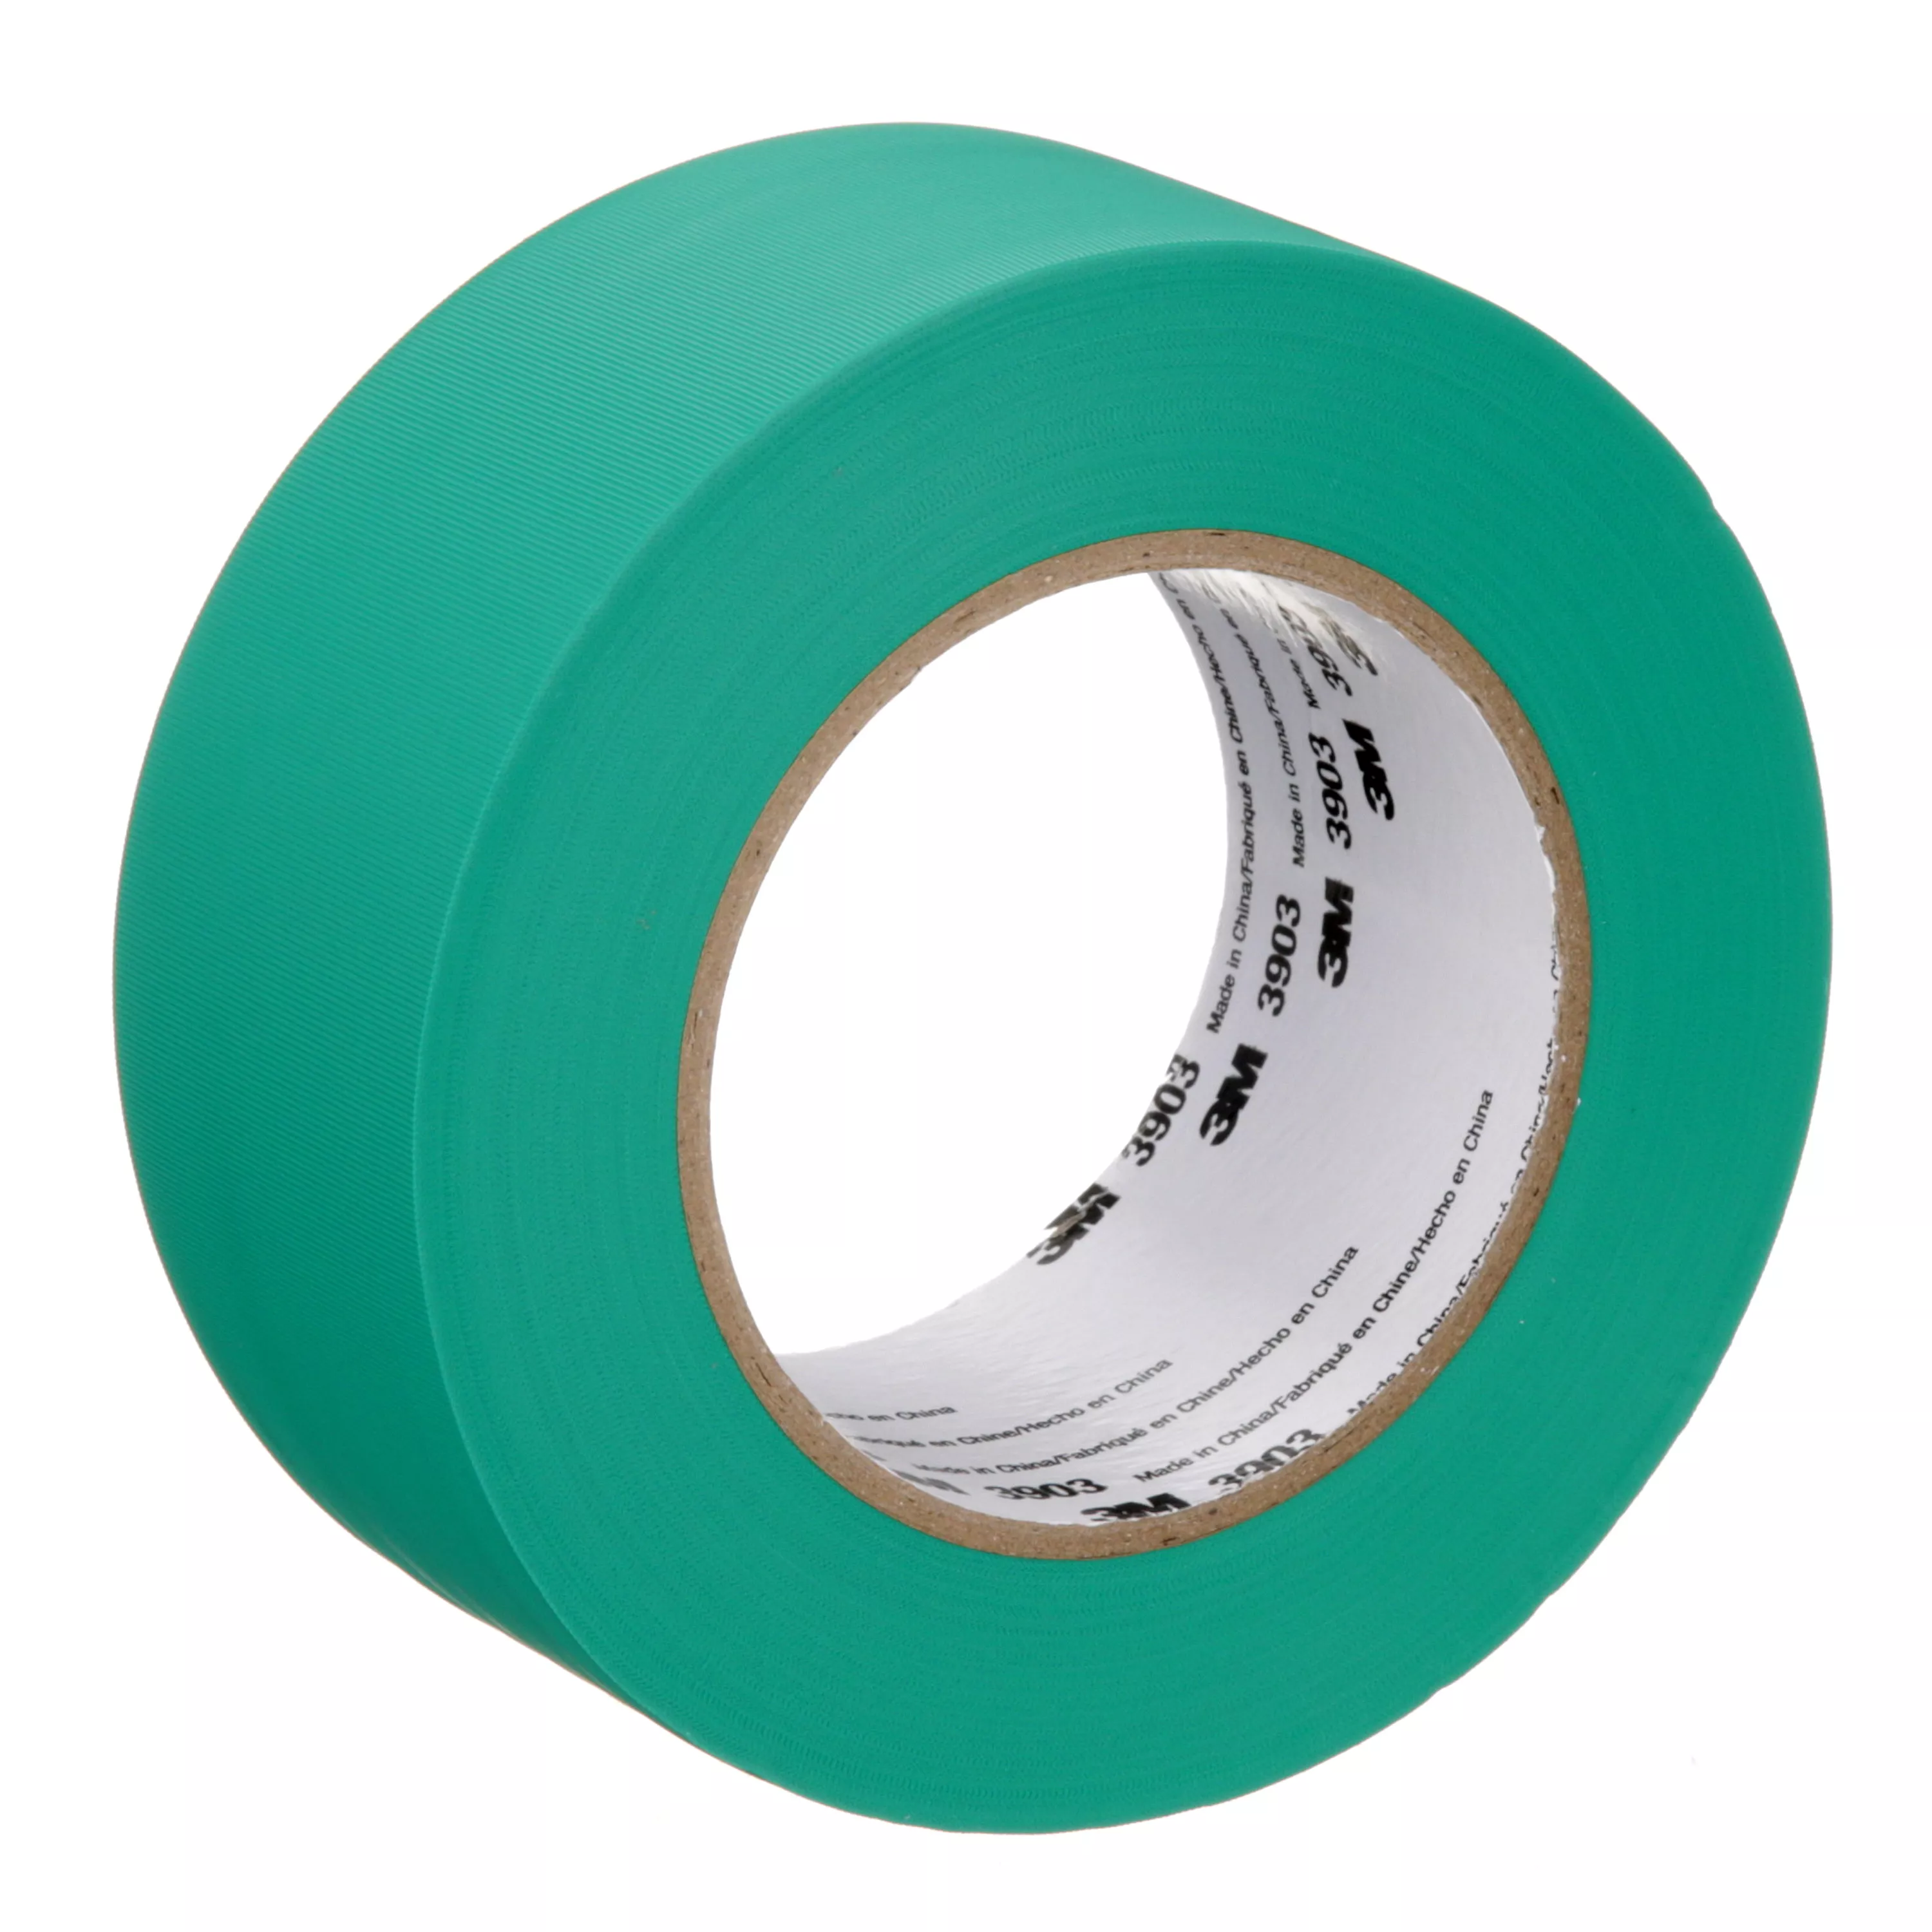 3M™ Vinyl Duct Tape 3903, Green, 2 in x 50 yd, 6.5 mil, 24/Case,
Individually Wrapped Conveniently Packaged